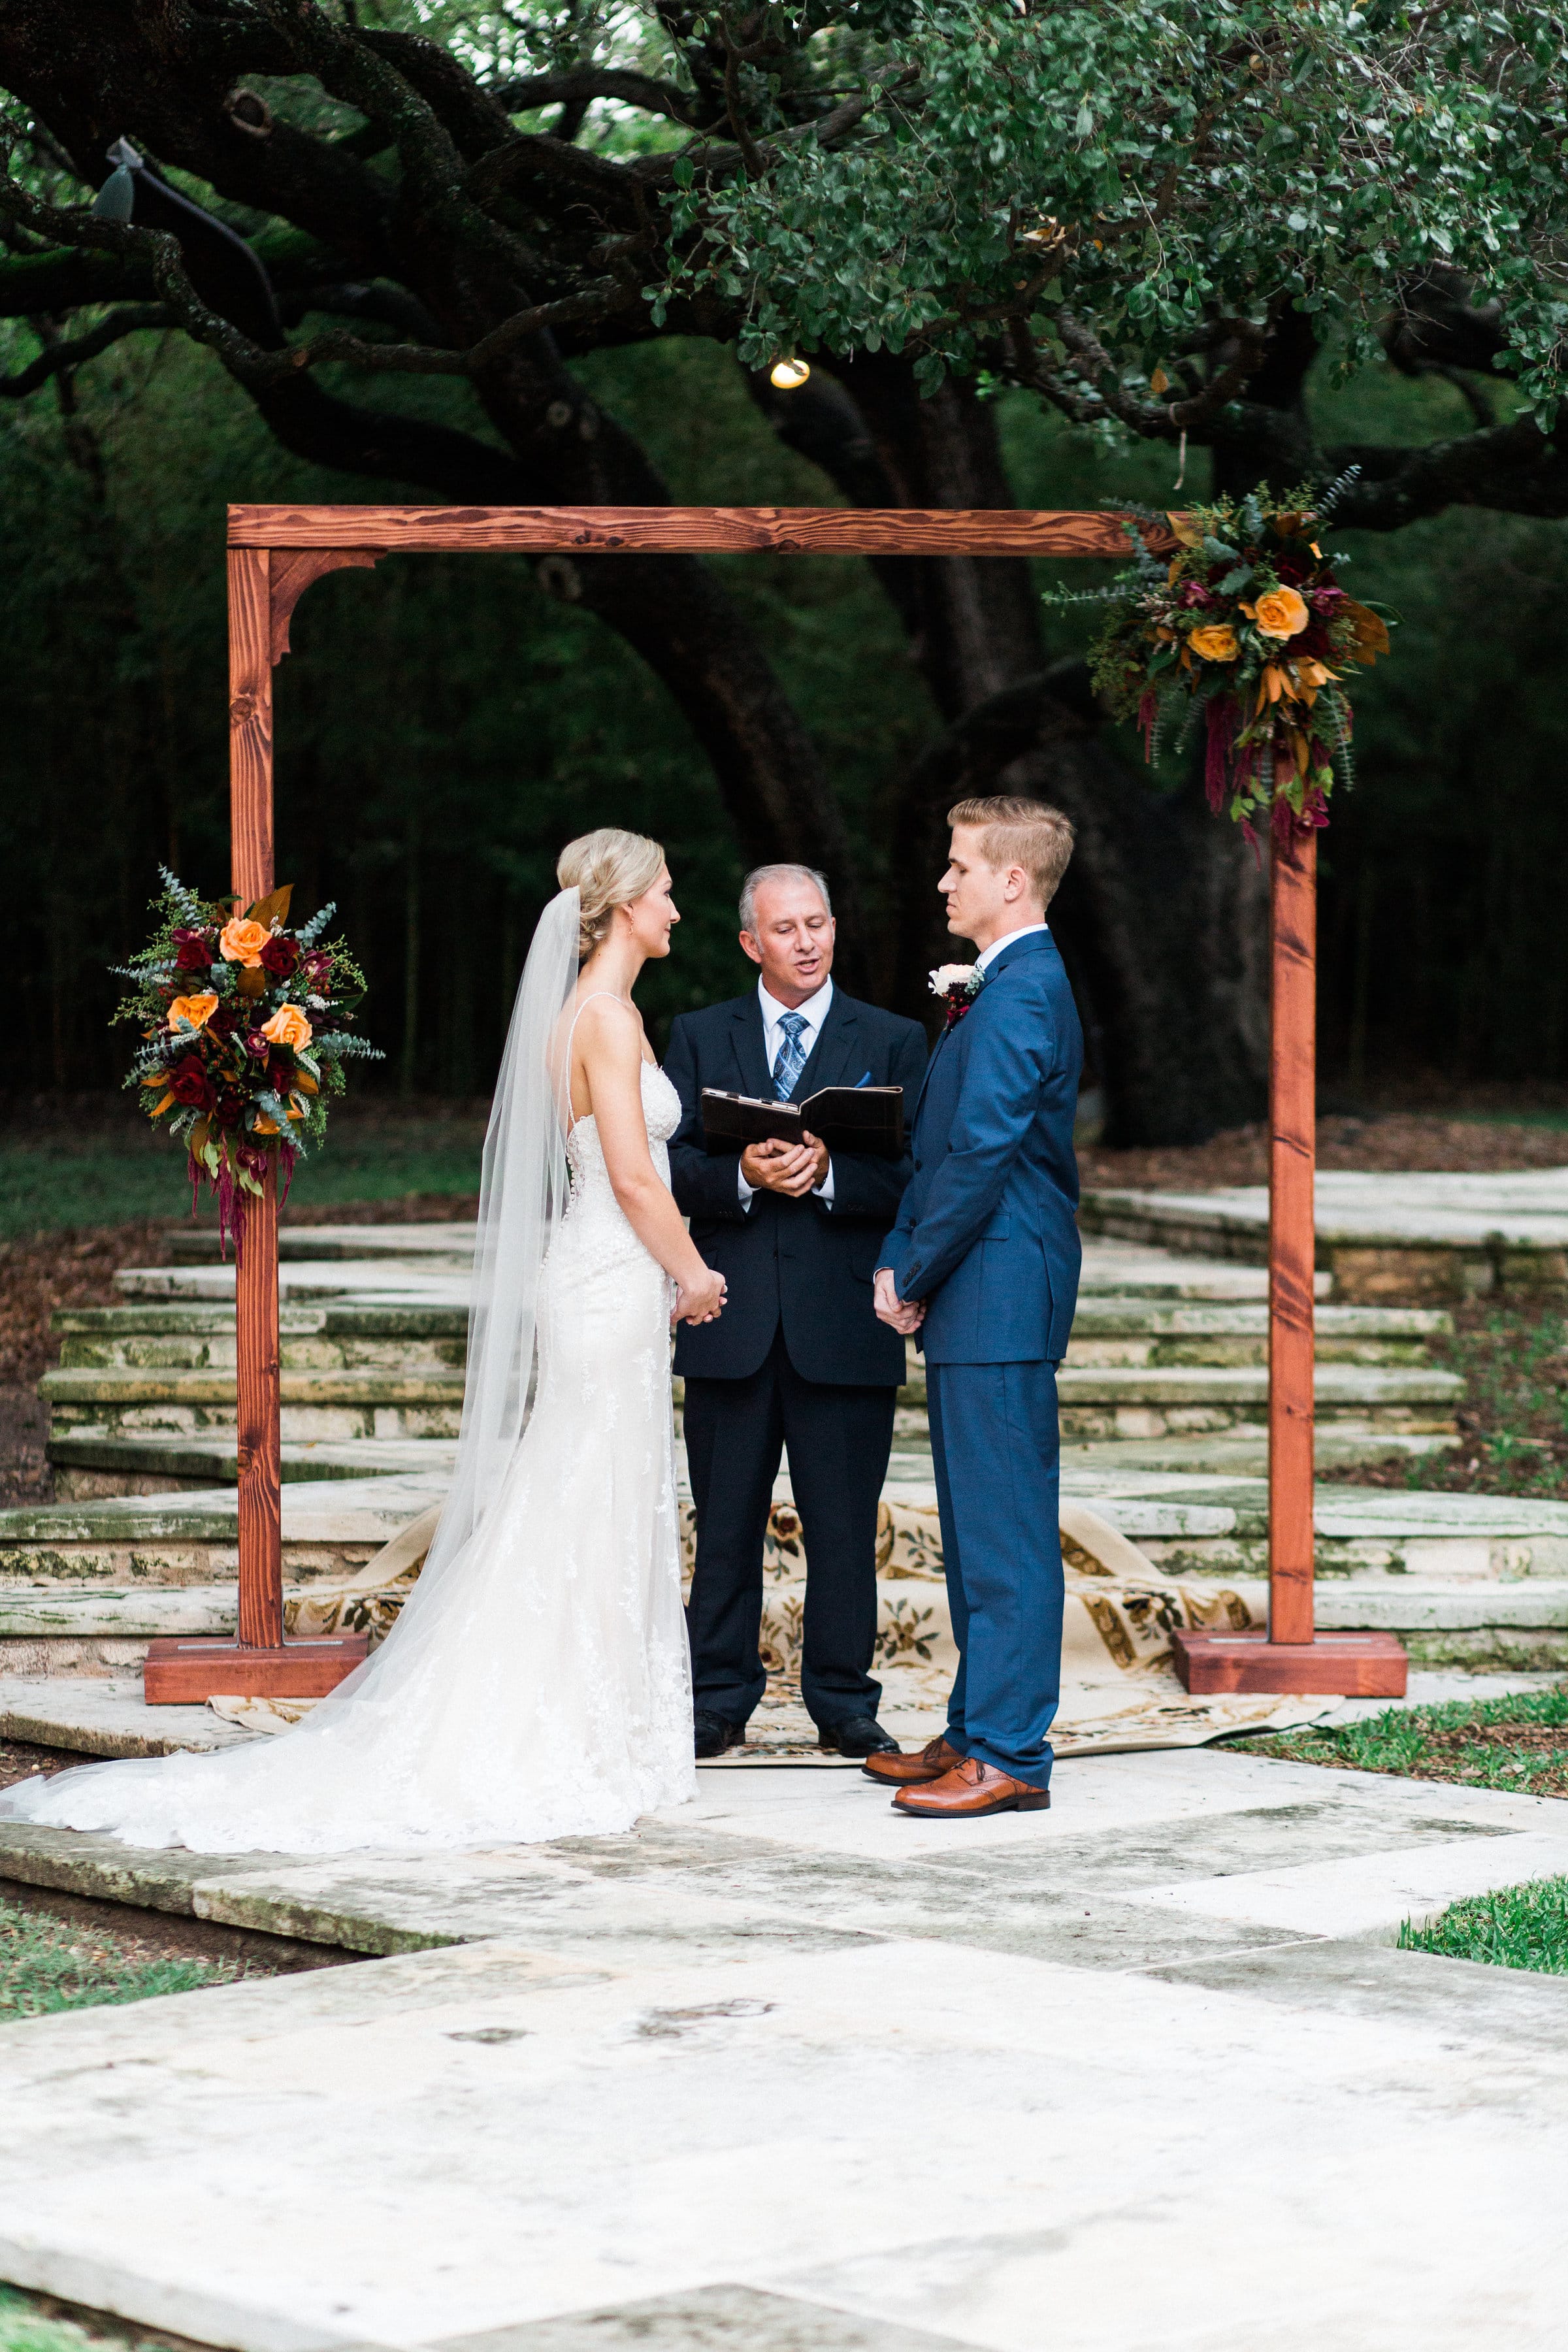 Gorgeous Outdoor Wedding Featuring Jewel Tones and Shimmery Lace Gown. Sarah wore the Nola wedding dress by Maggie Sottero.